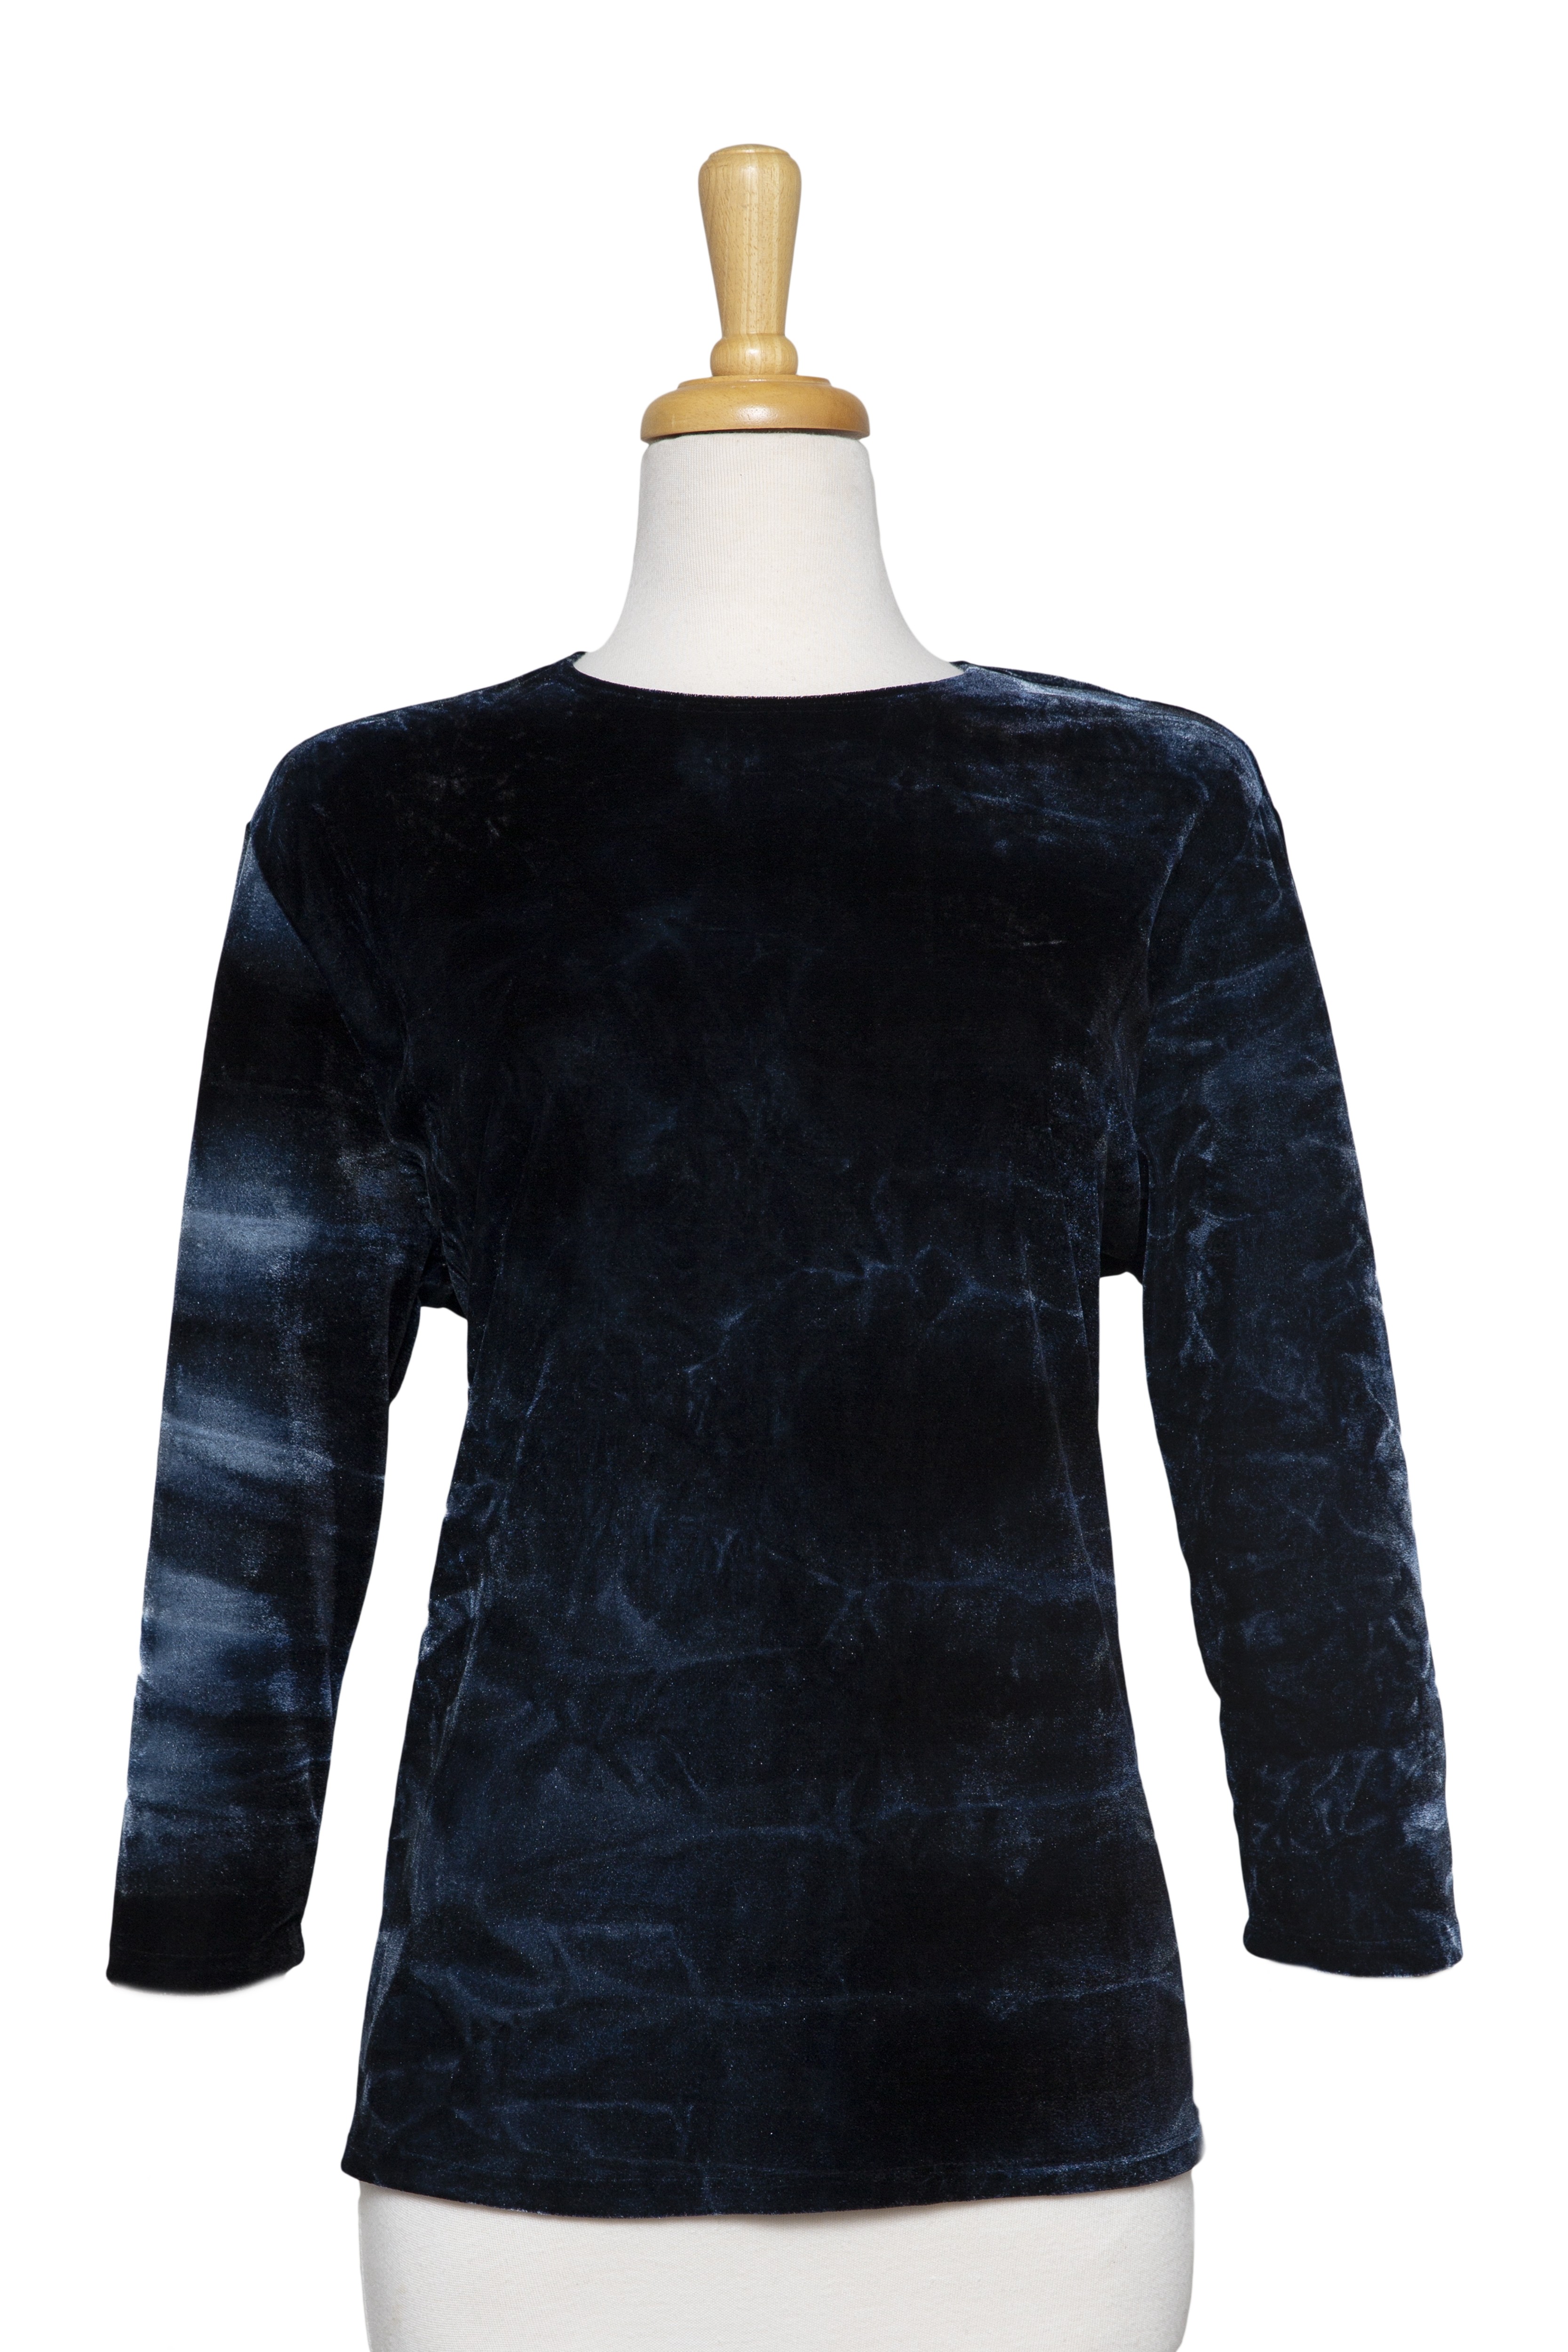 Shades of Blue Ombre Velvet 3/4 Sleeve Top